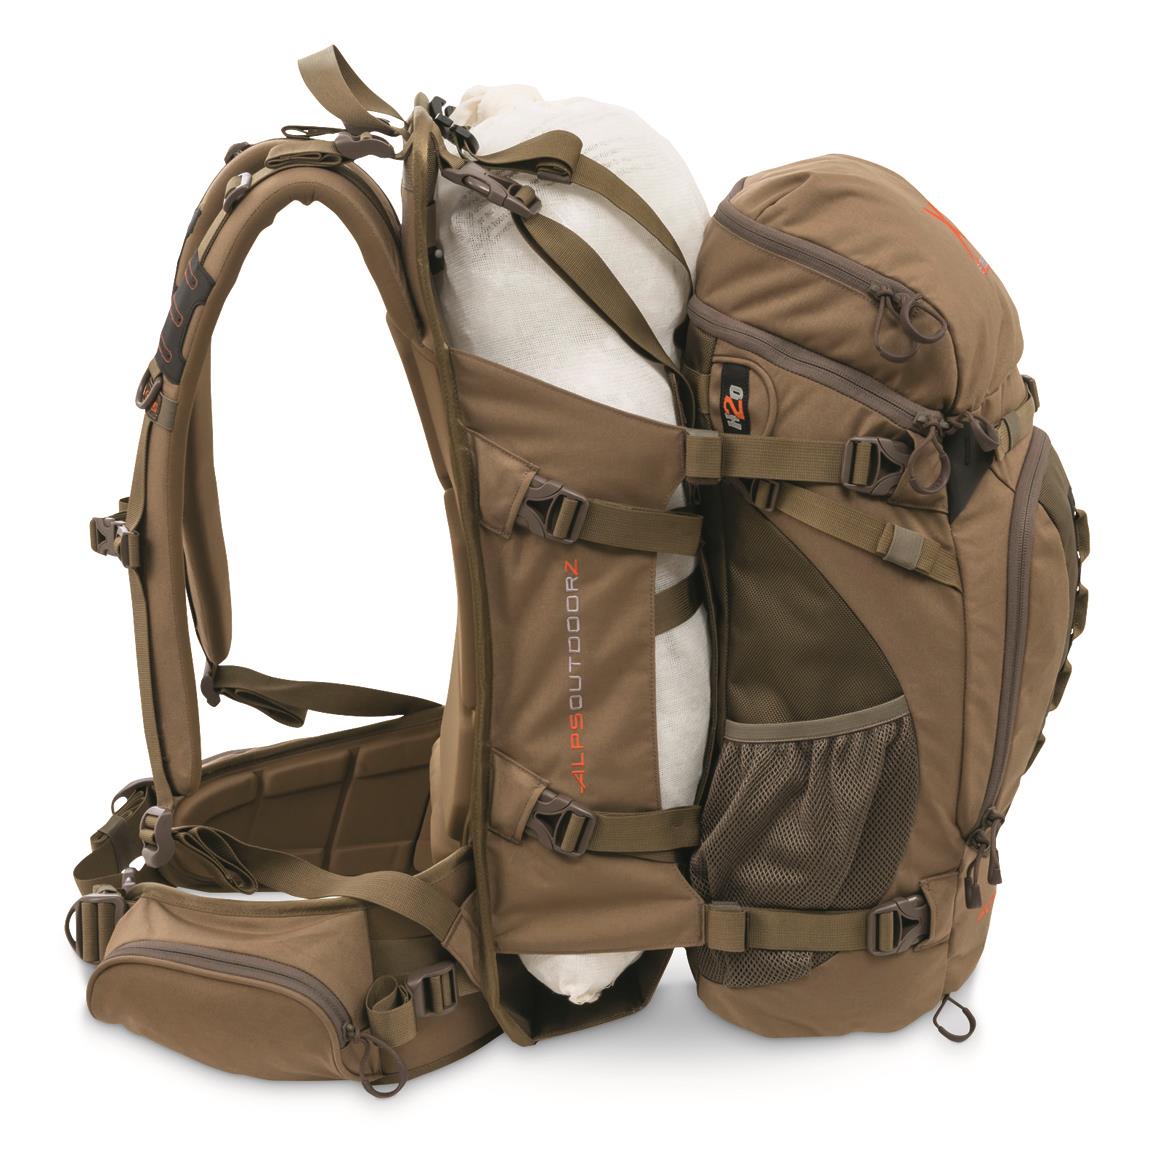 ALPS OutdoorZ Hybrid X Hunting Pack - 706780, Hunting Backpacks at ...